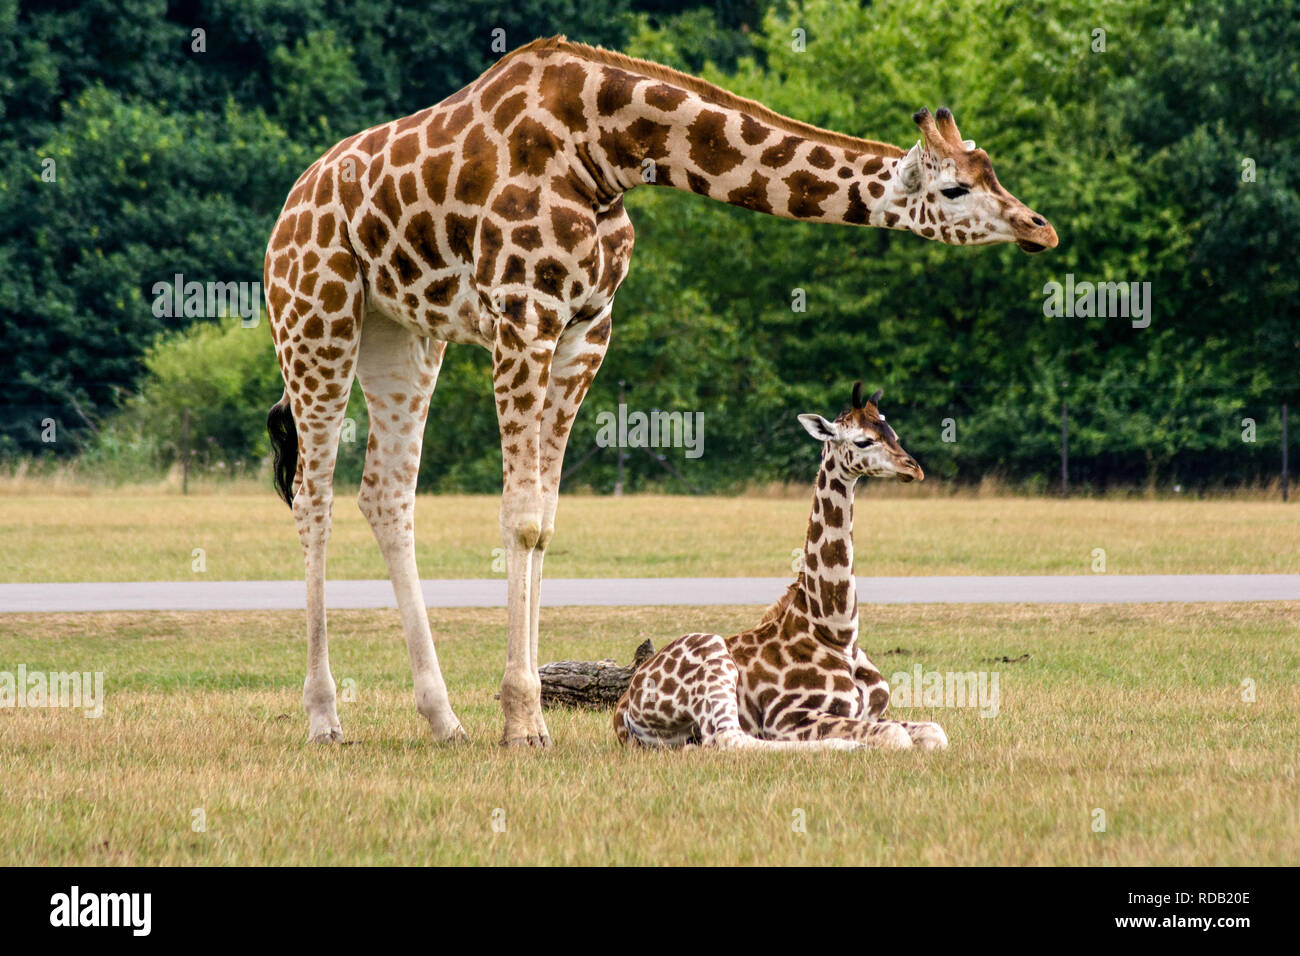 Camelopardalis  or giraffe with offspring Stock Photo